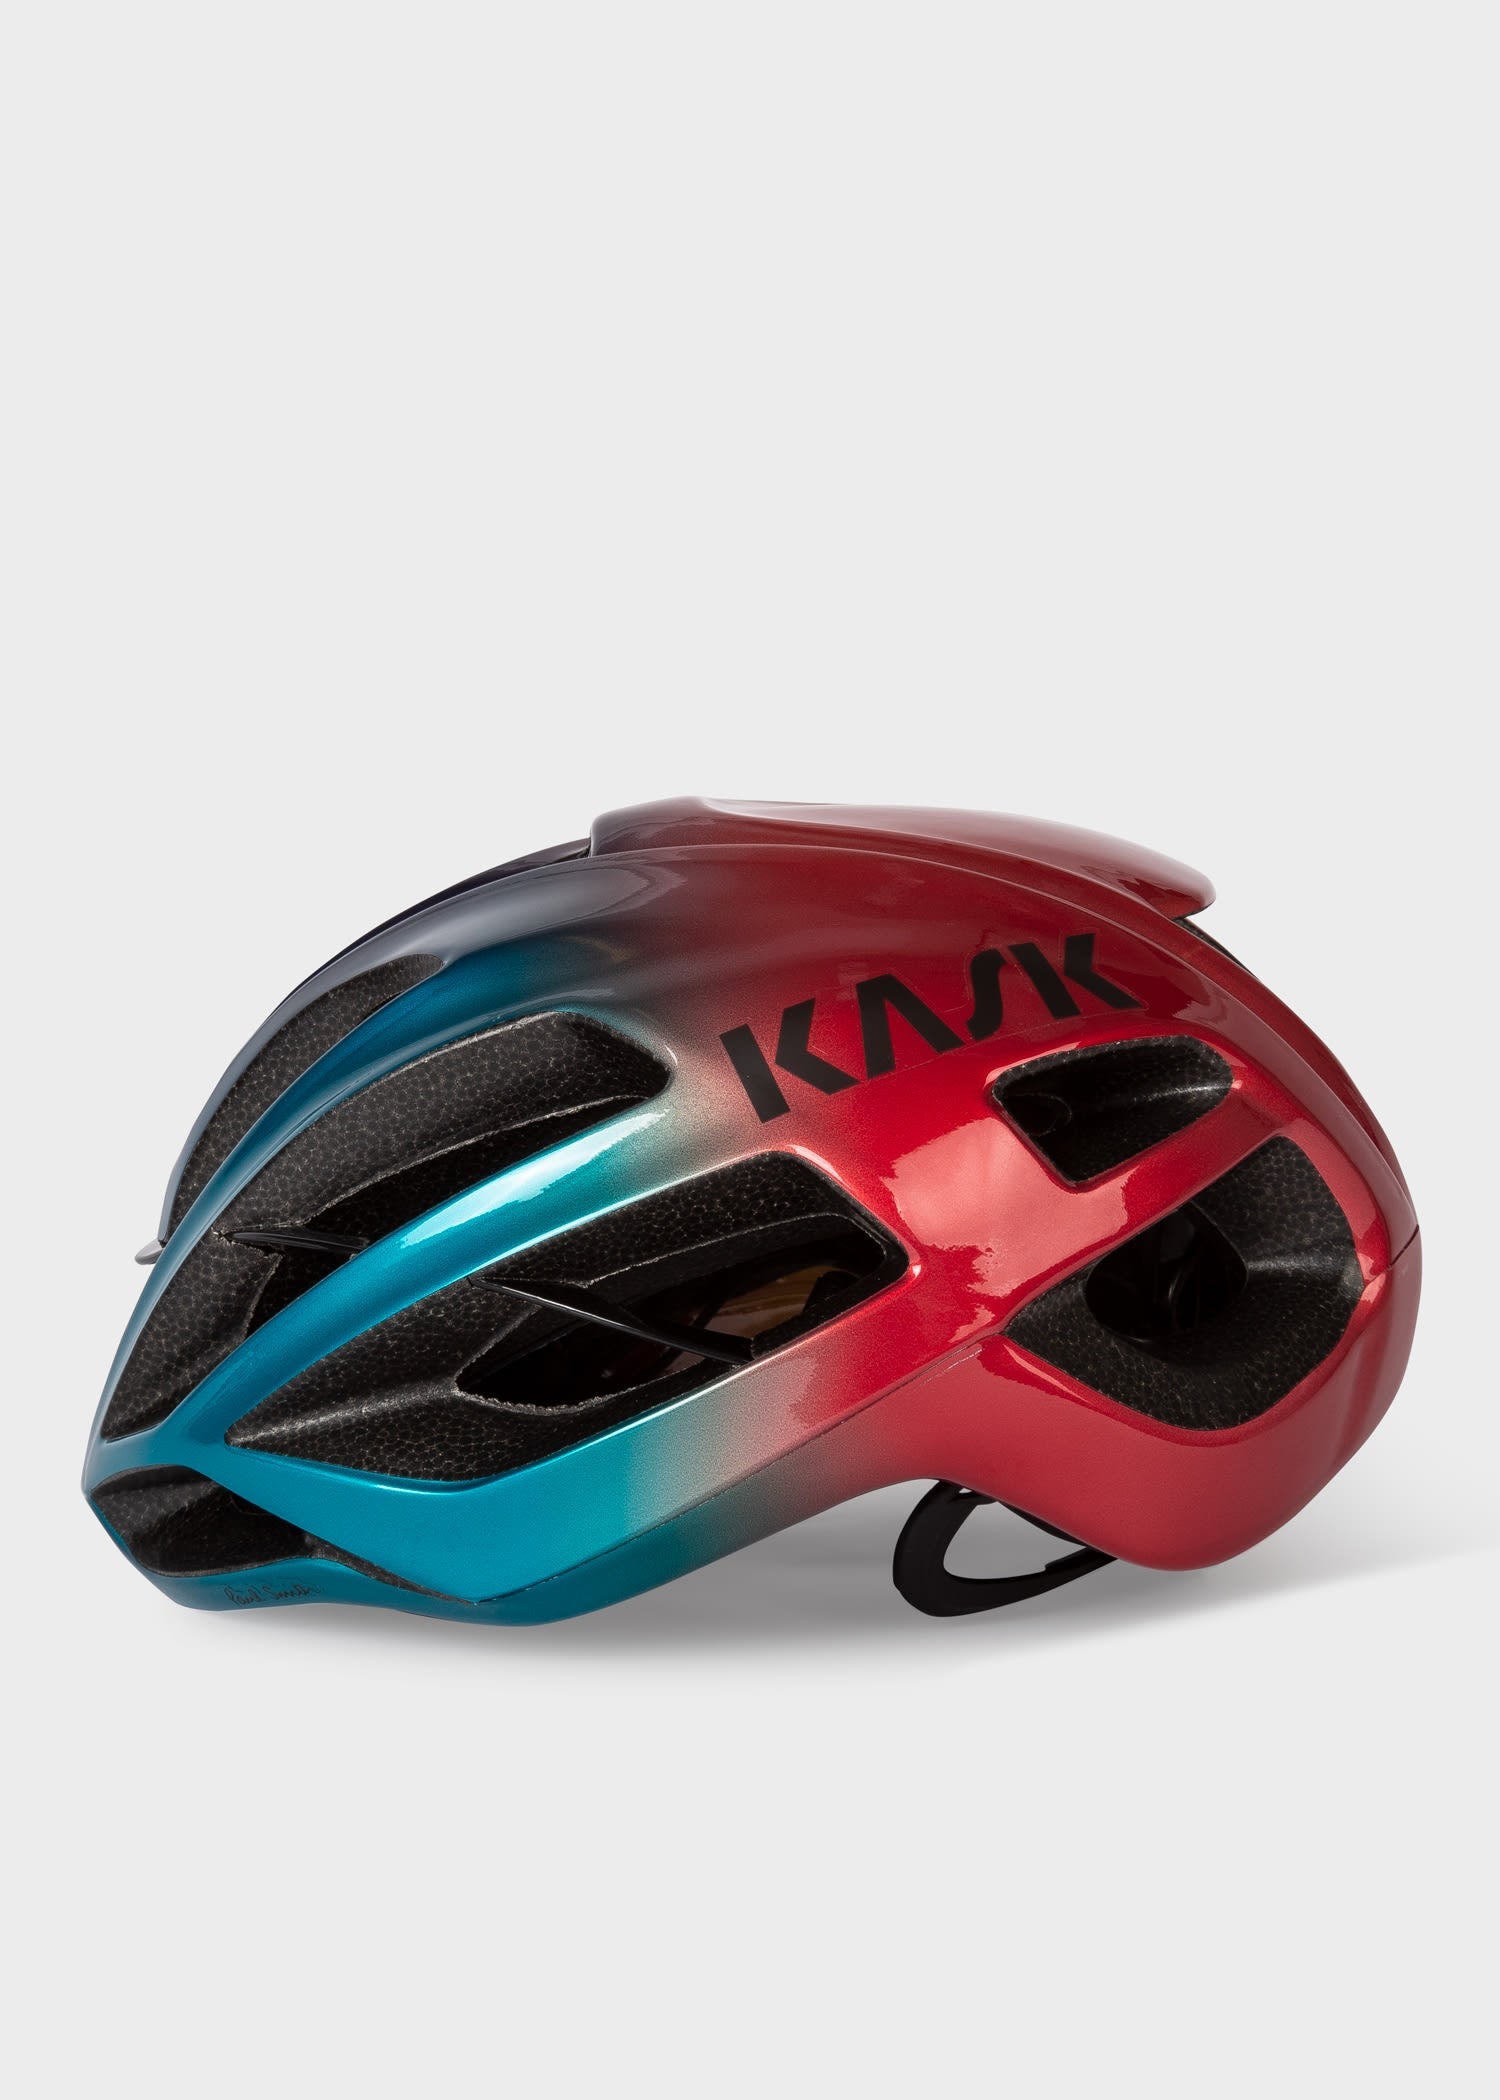 PAUL SMITH + KASK 'ARTIST STRIP FADE' PROTONE CYCLING HELMET (EXCLUSIVE)